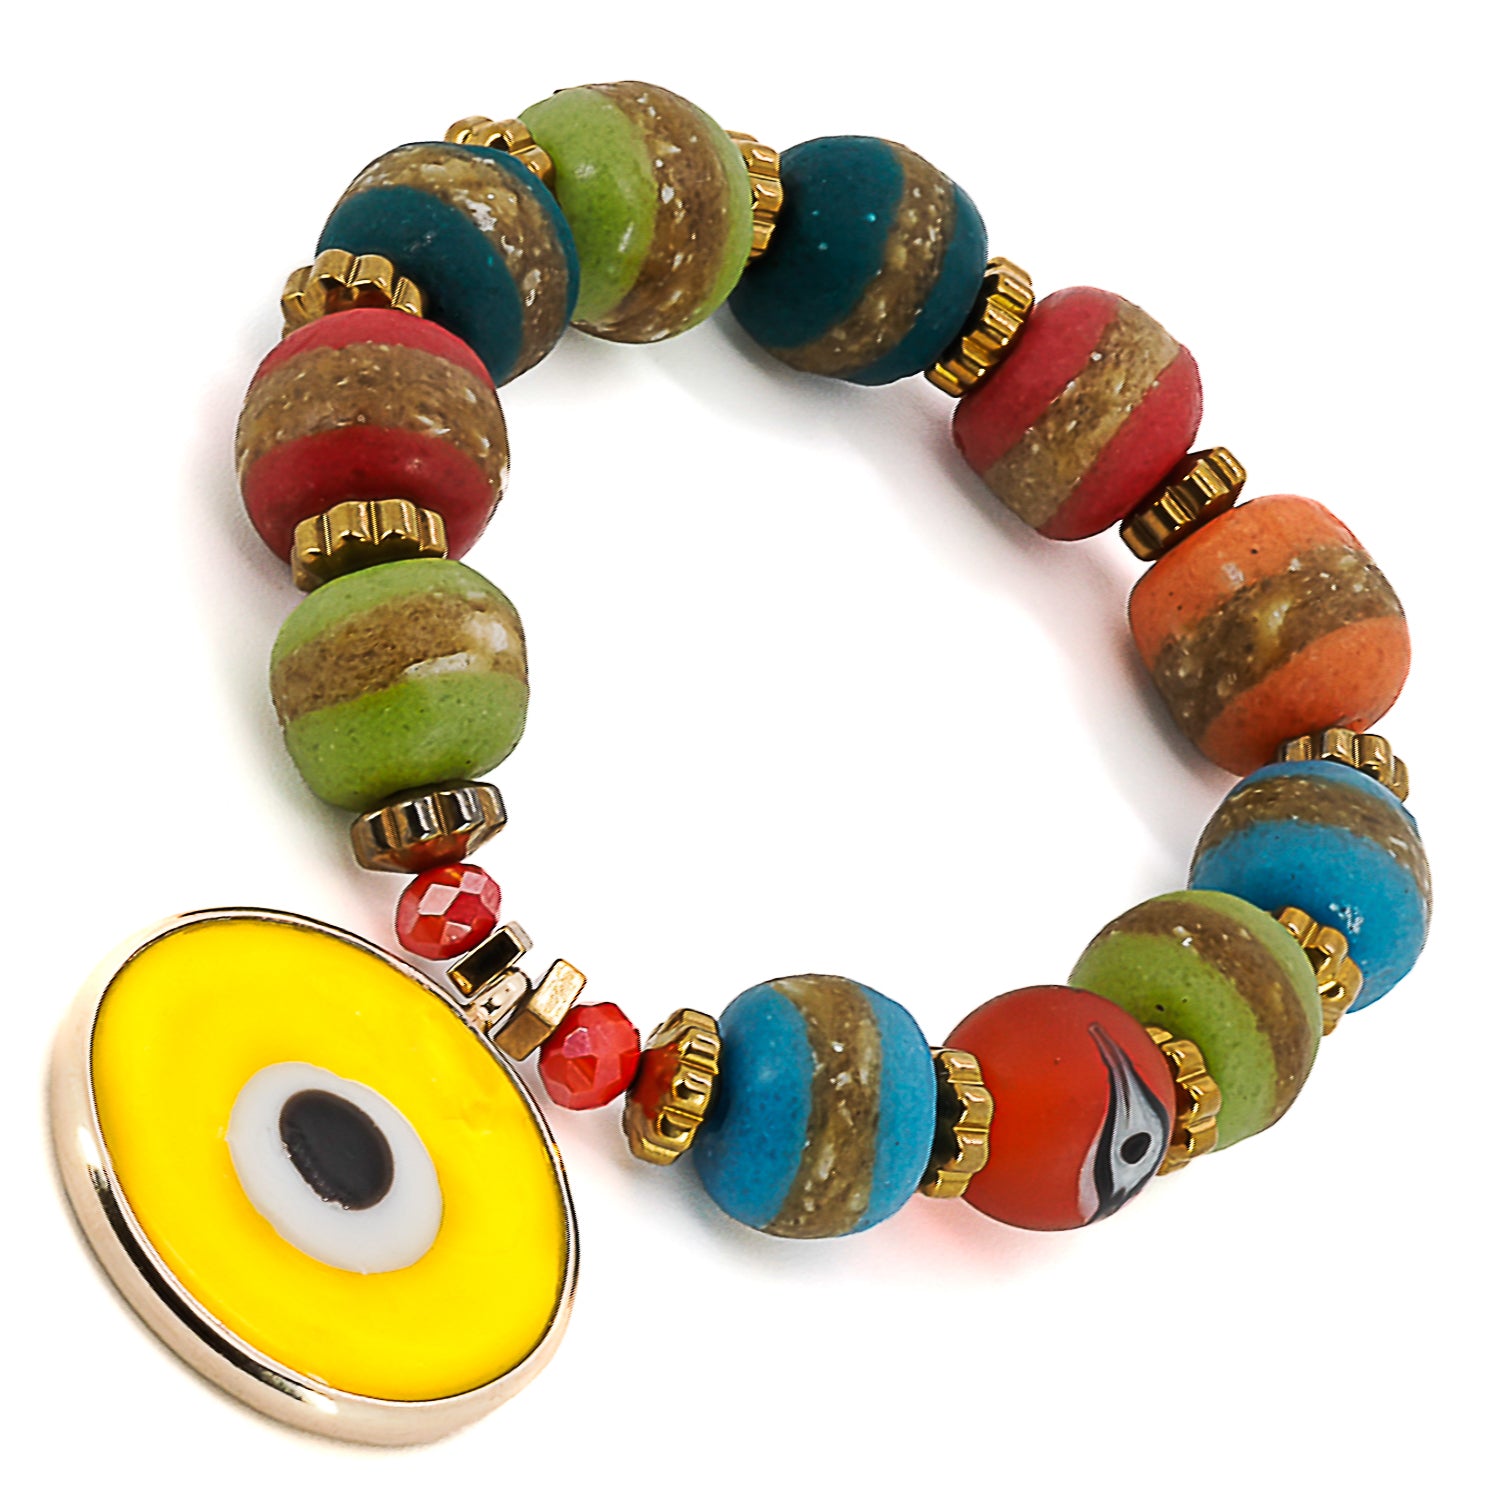 Explore the cheerful and adventurous spirit of the Yellow Evil Eye Carpe Diem Bracelet, designed to seize the day and embrace positivity.